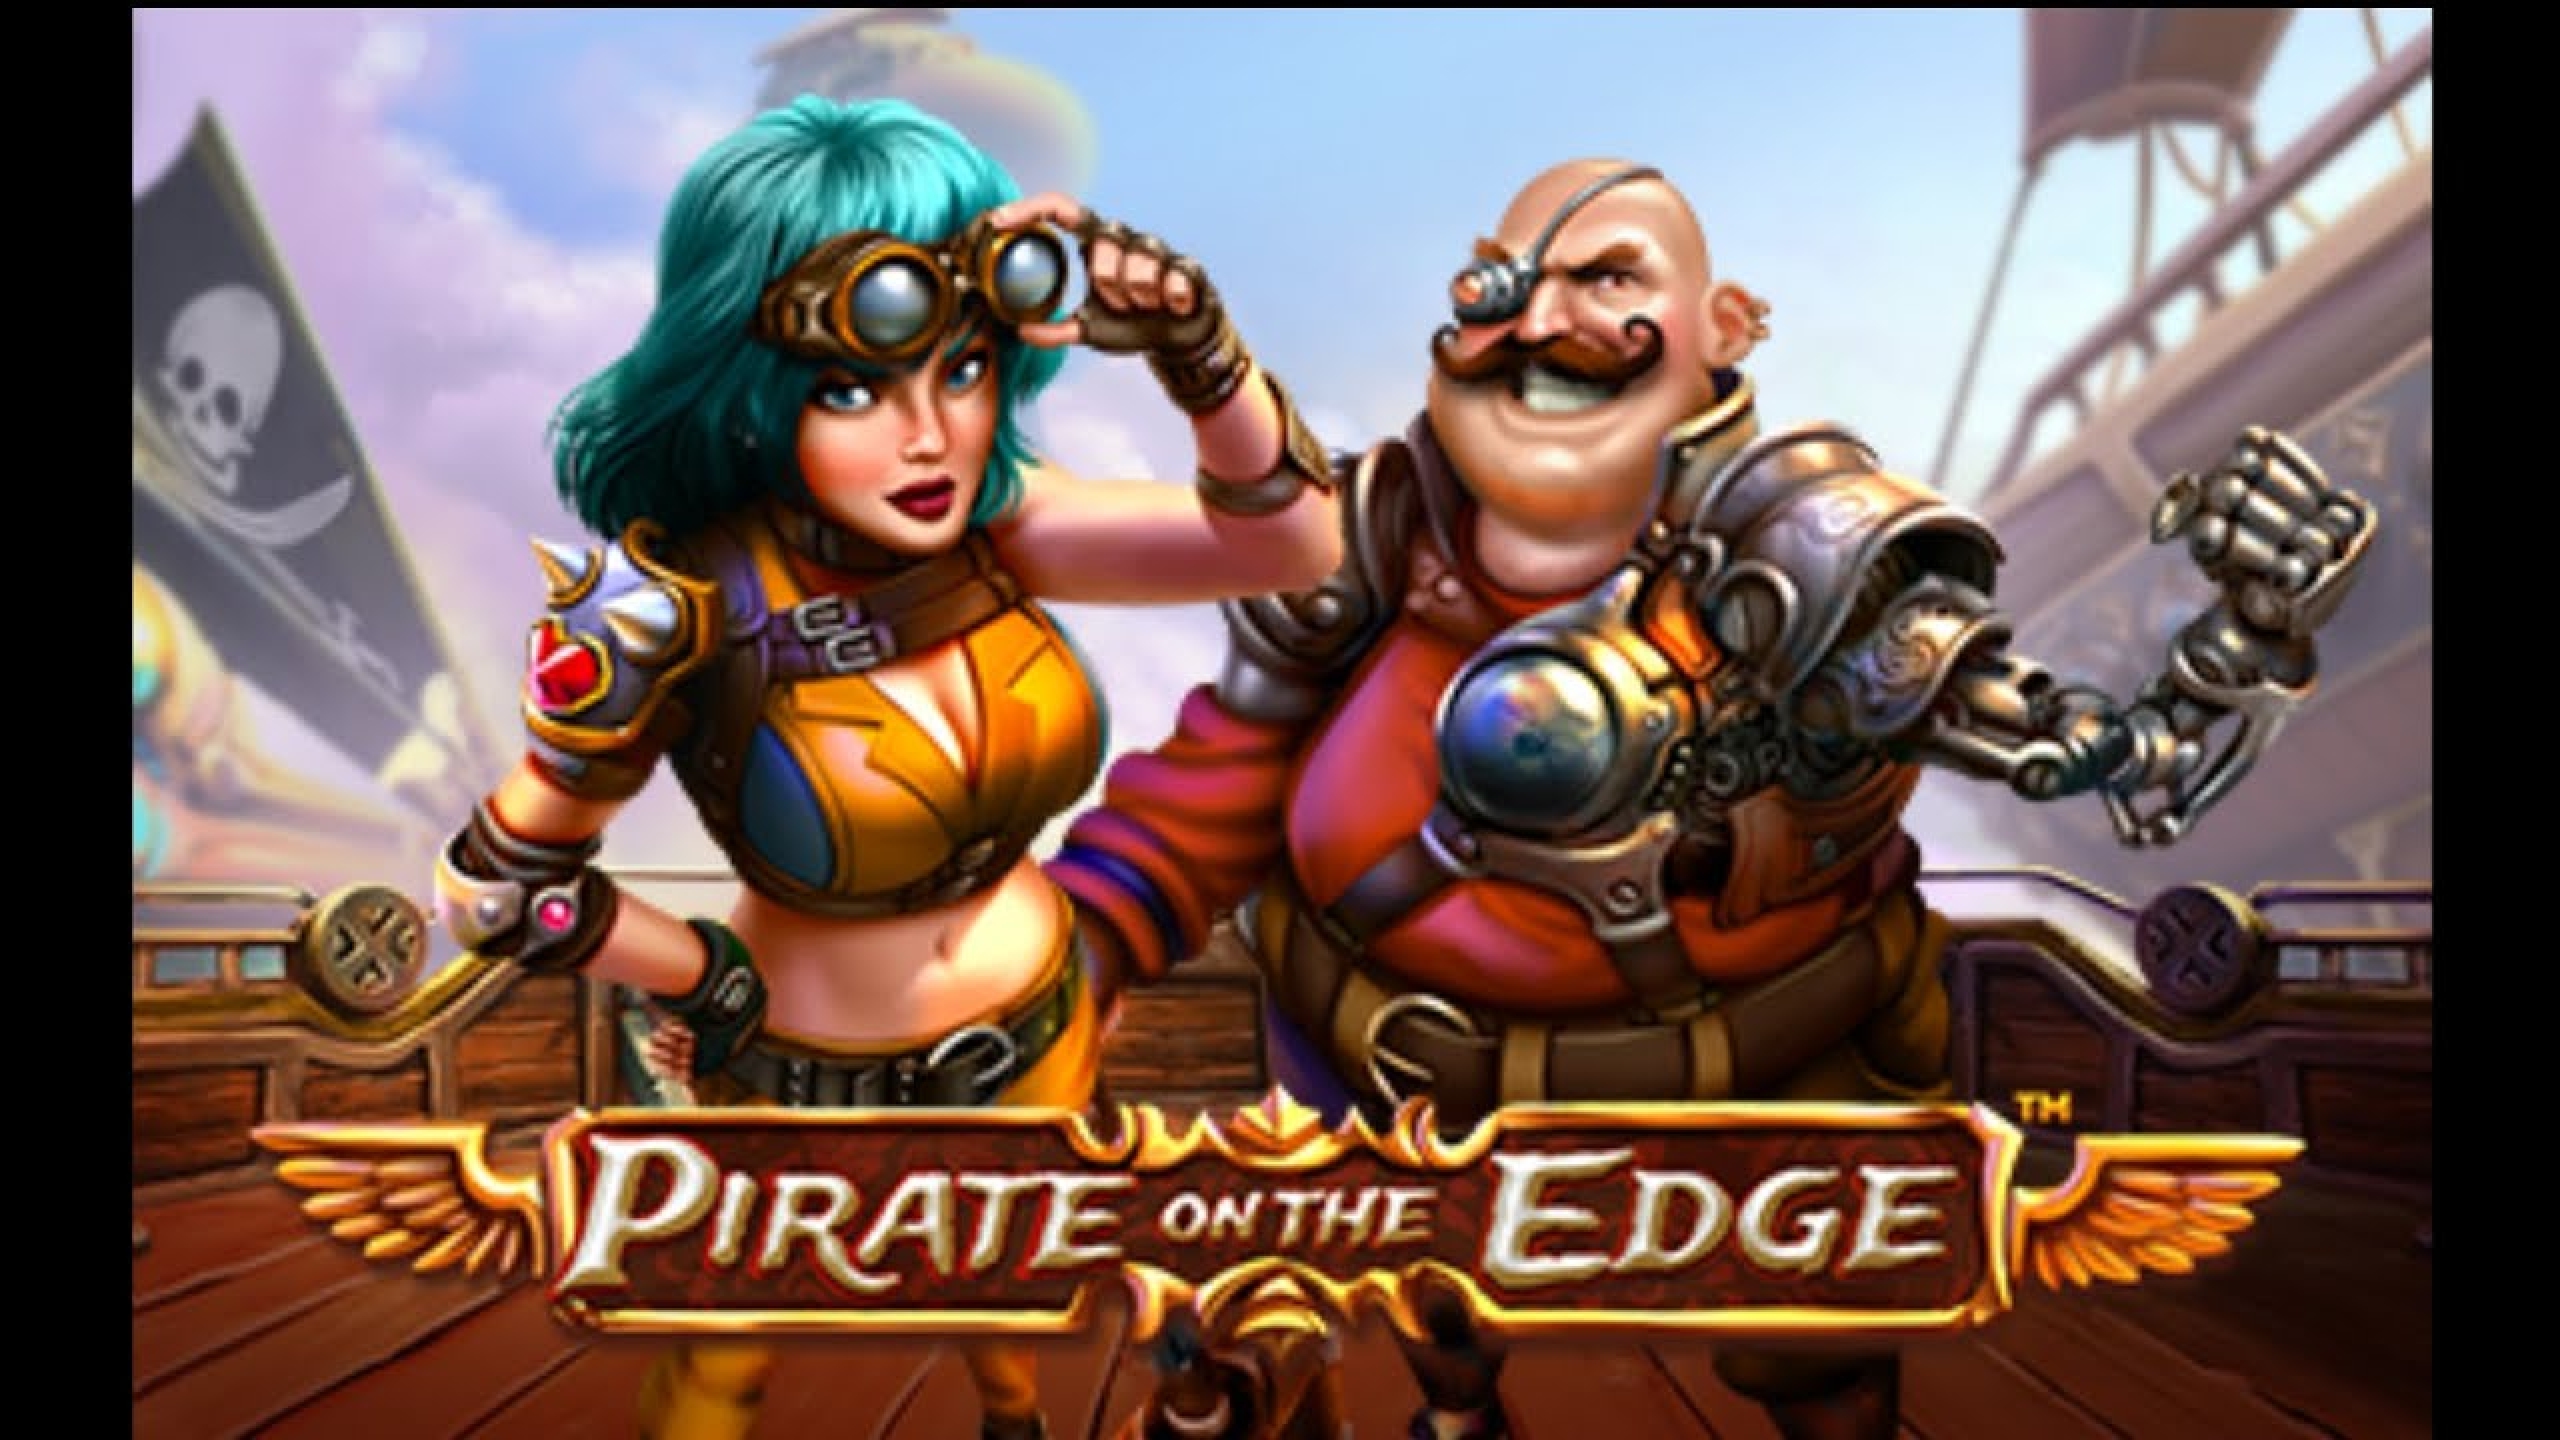 The Pirate on the Edge Online Slot Demo Game by Skywind